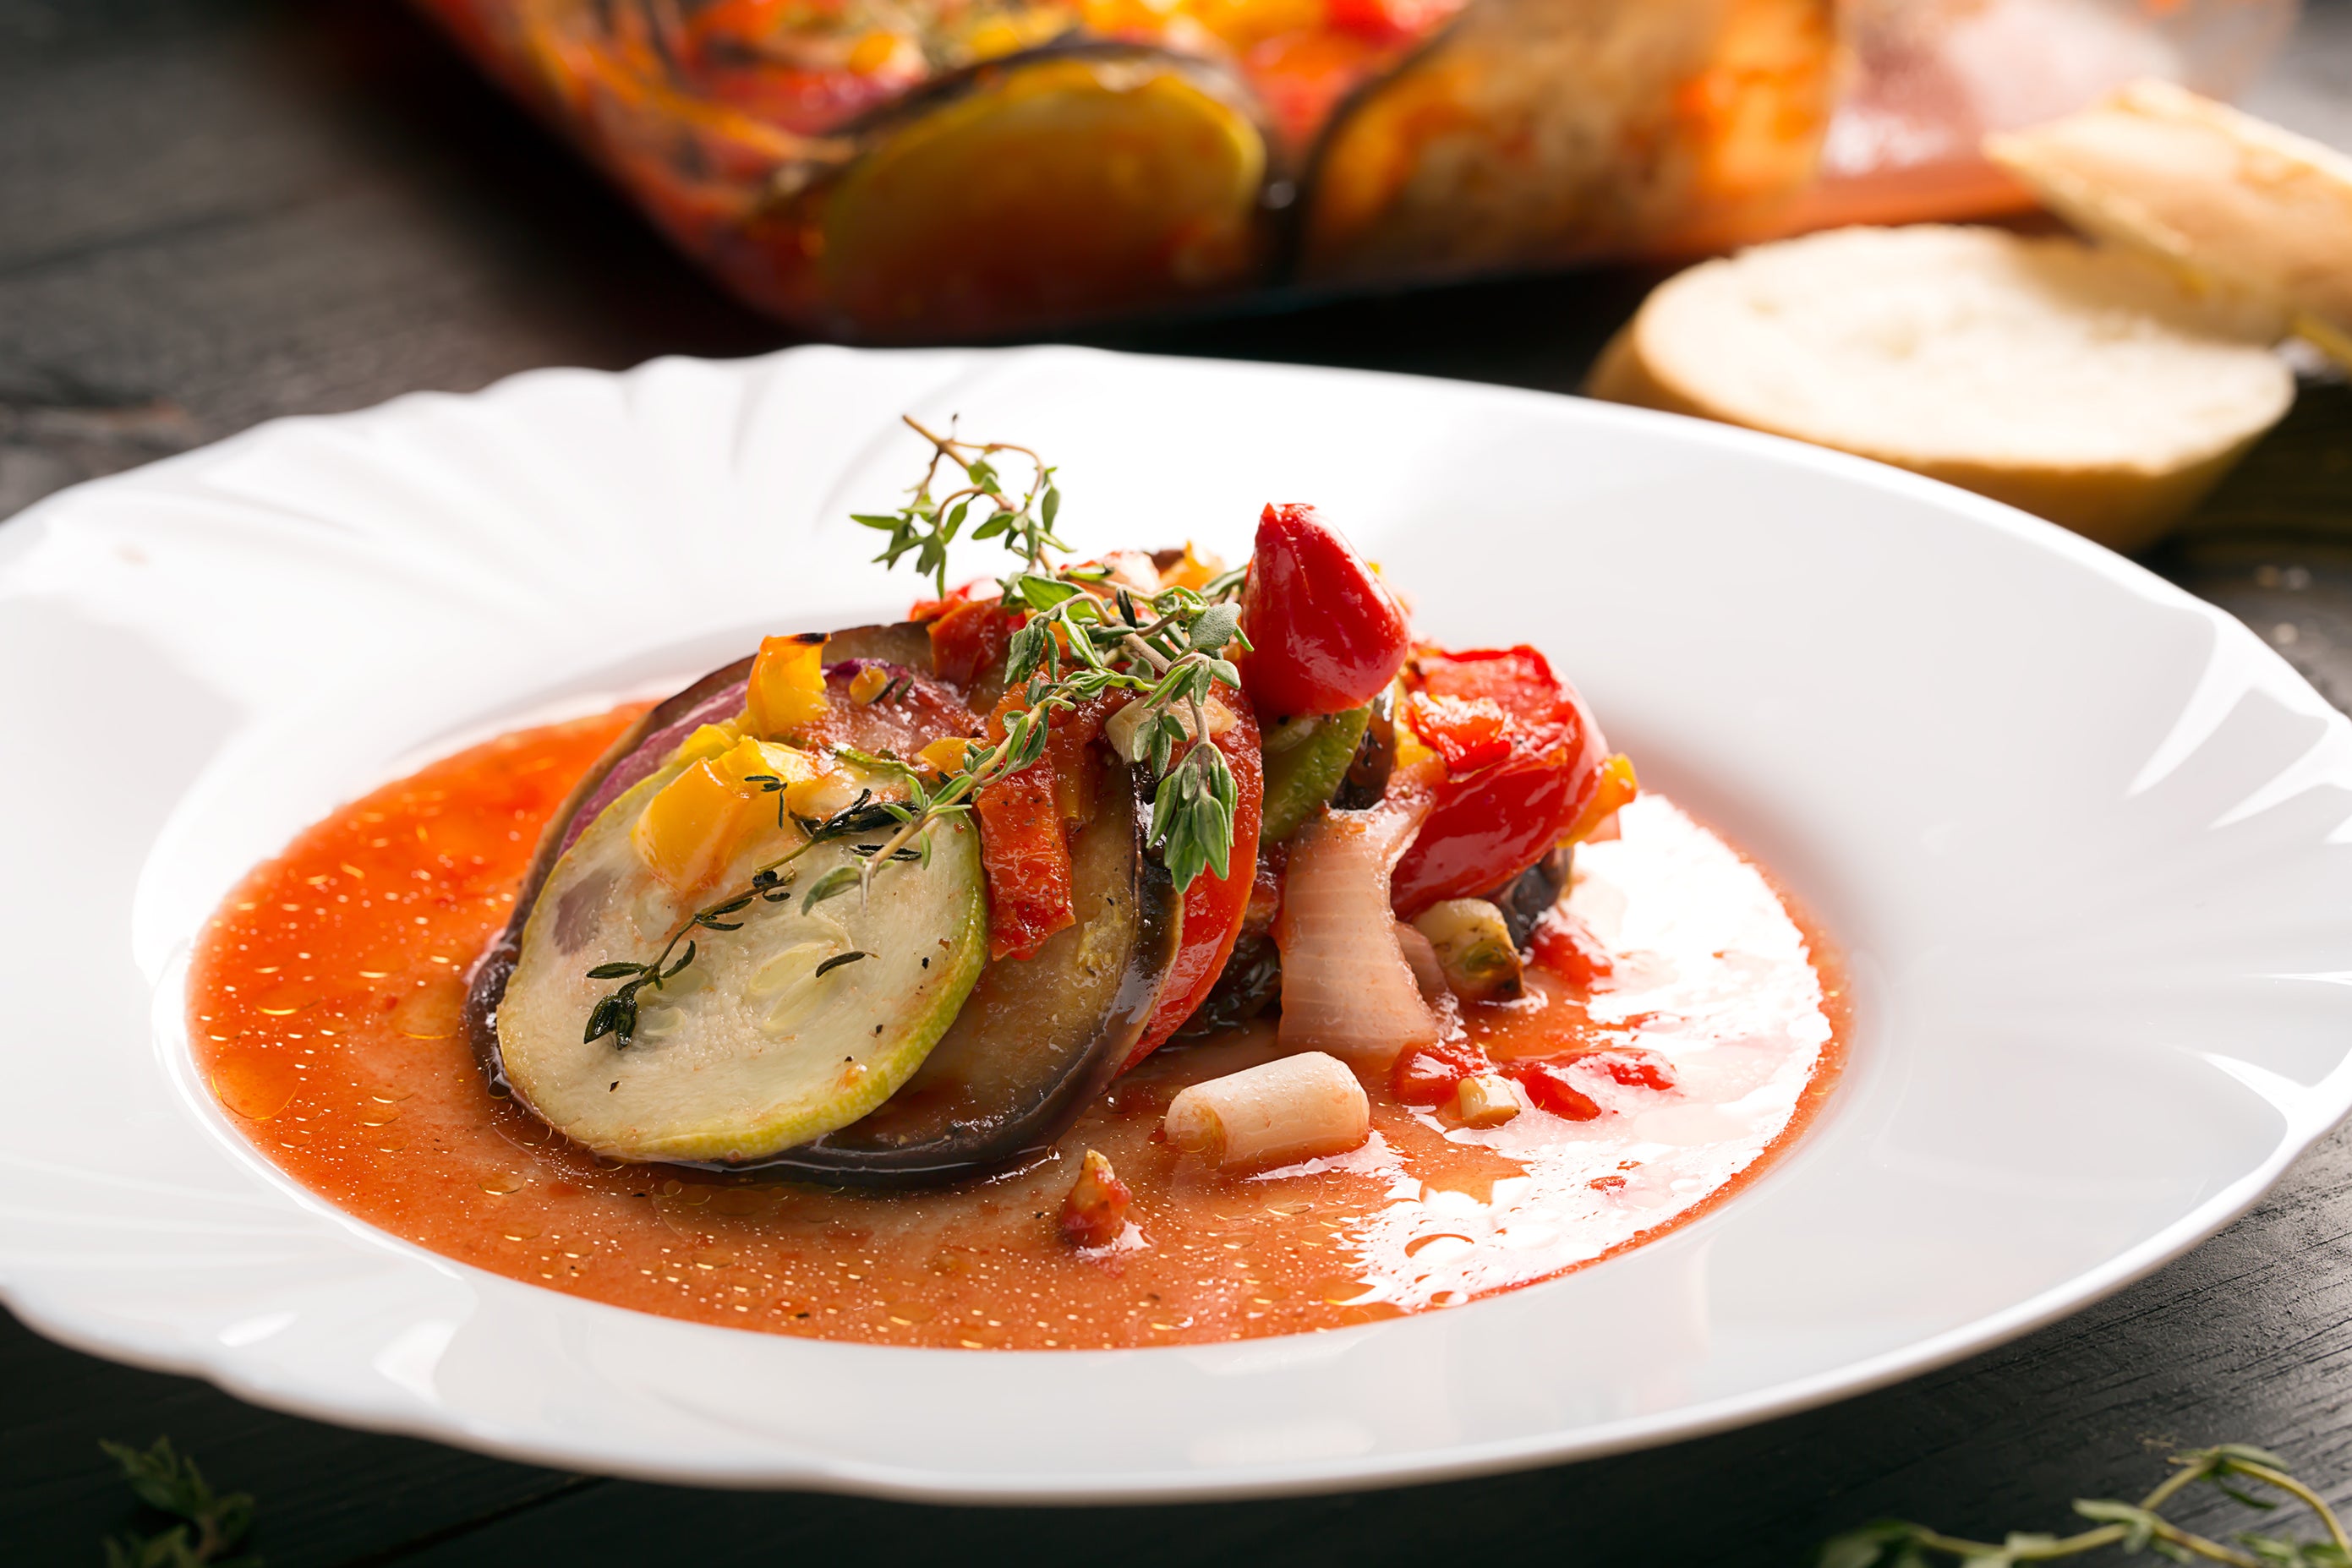 French Ratatouille is a vegetable stew made with eggplant, tomatoes, peppers, and fennel, flavored with herbs such as thyme and rosemary.